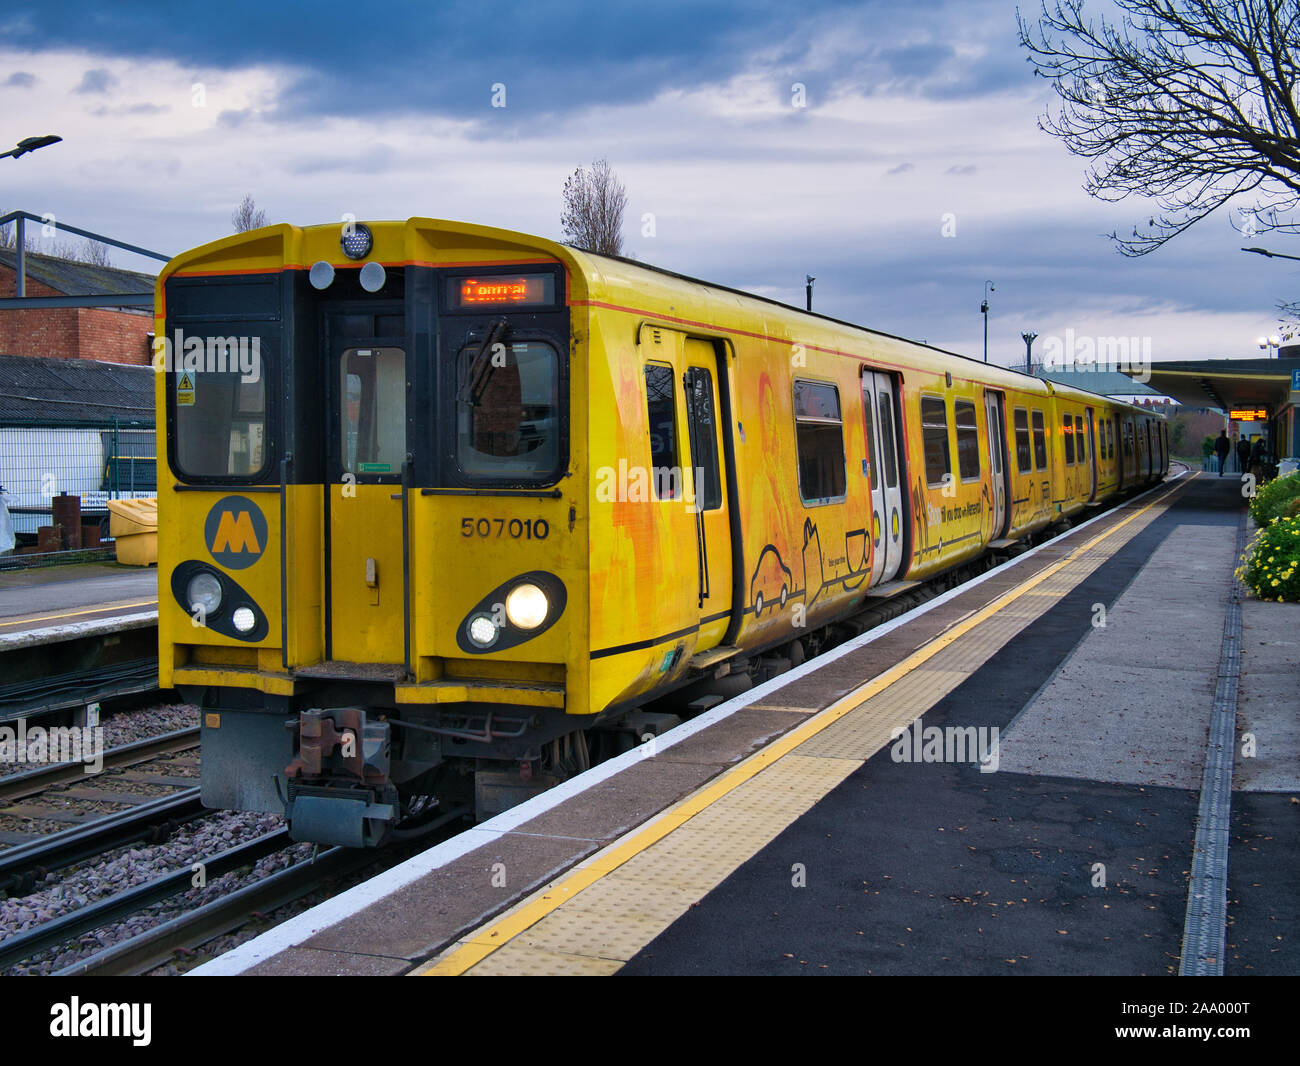 An electric commuter train at Hoylake Station on the Merseyrail rail transport network, a regional commuter network with Liverpool as its hub Stock Photo